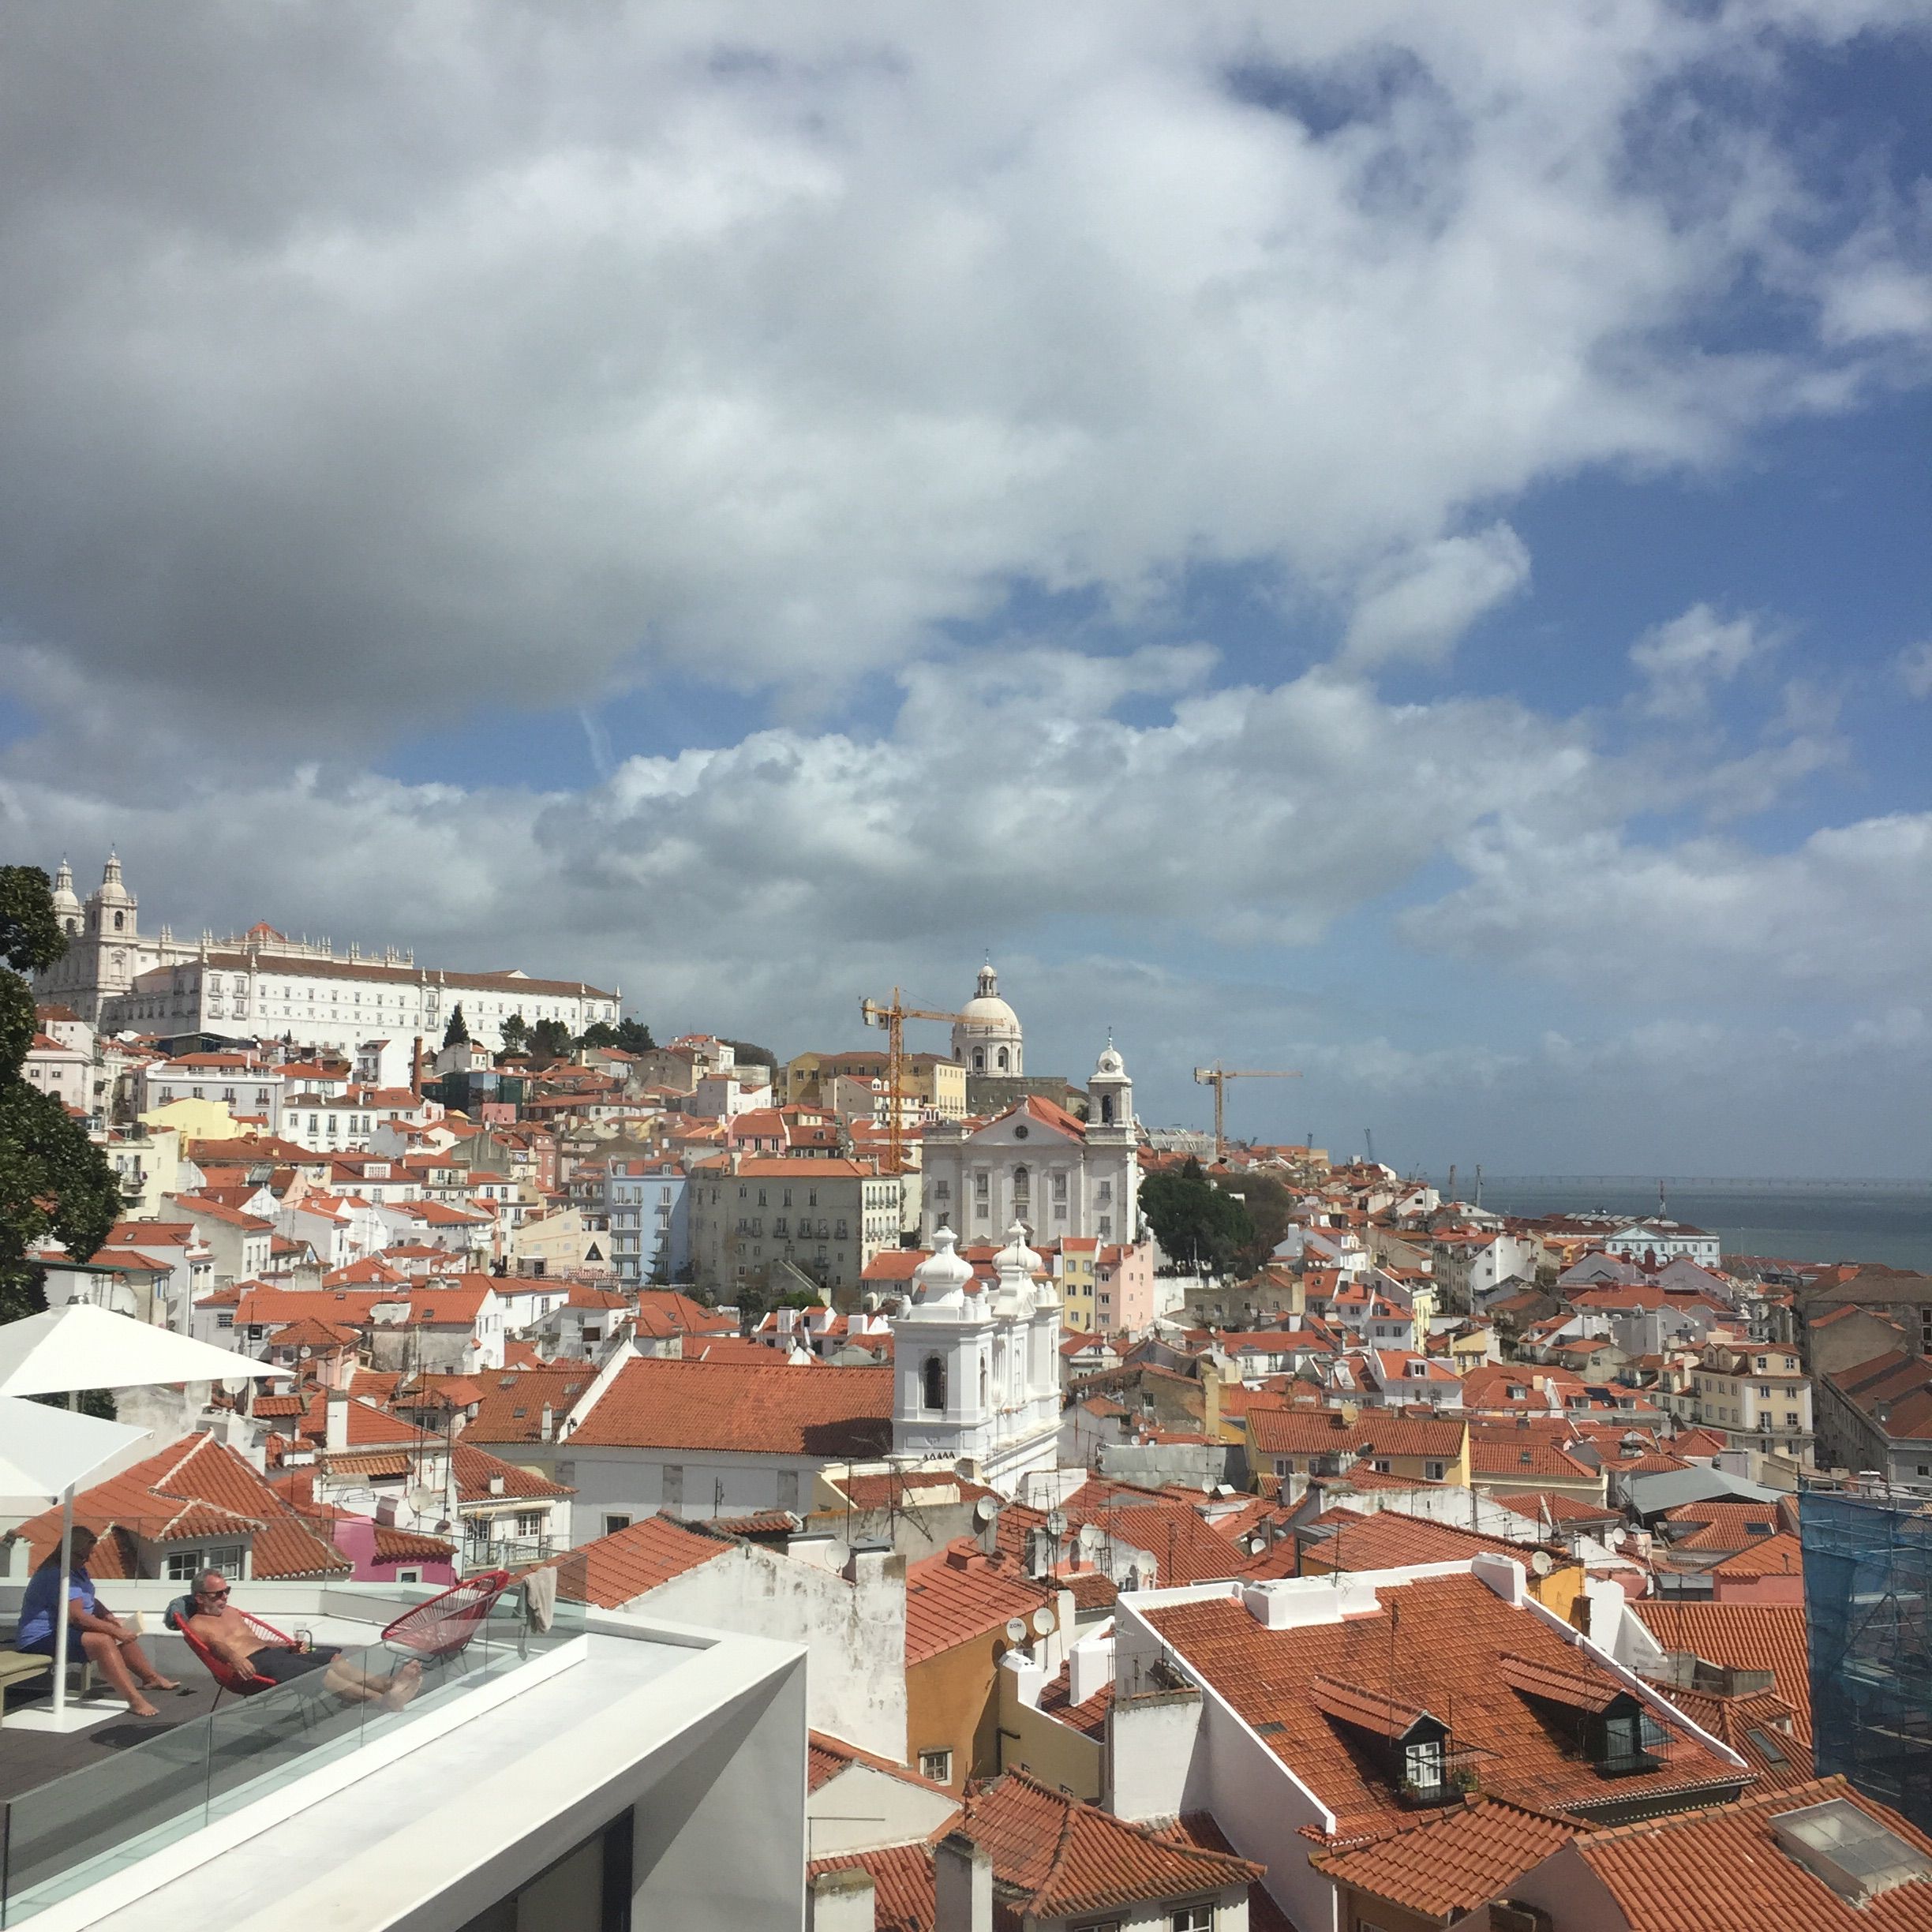 Lisbon's rooftops, from the roof of the Memmo Alfama.